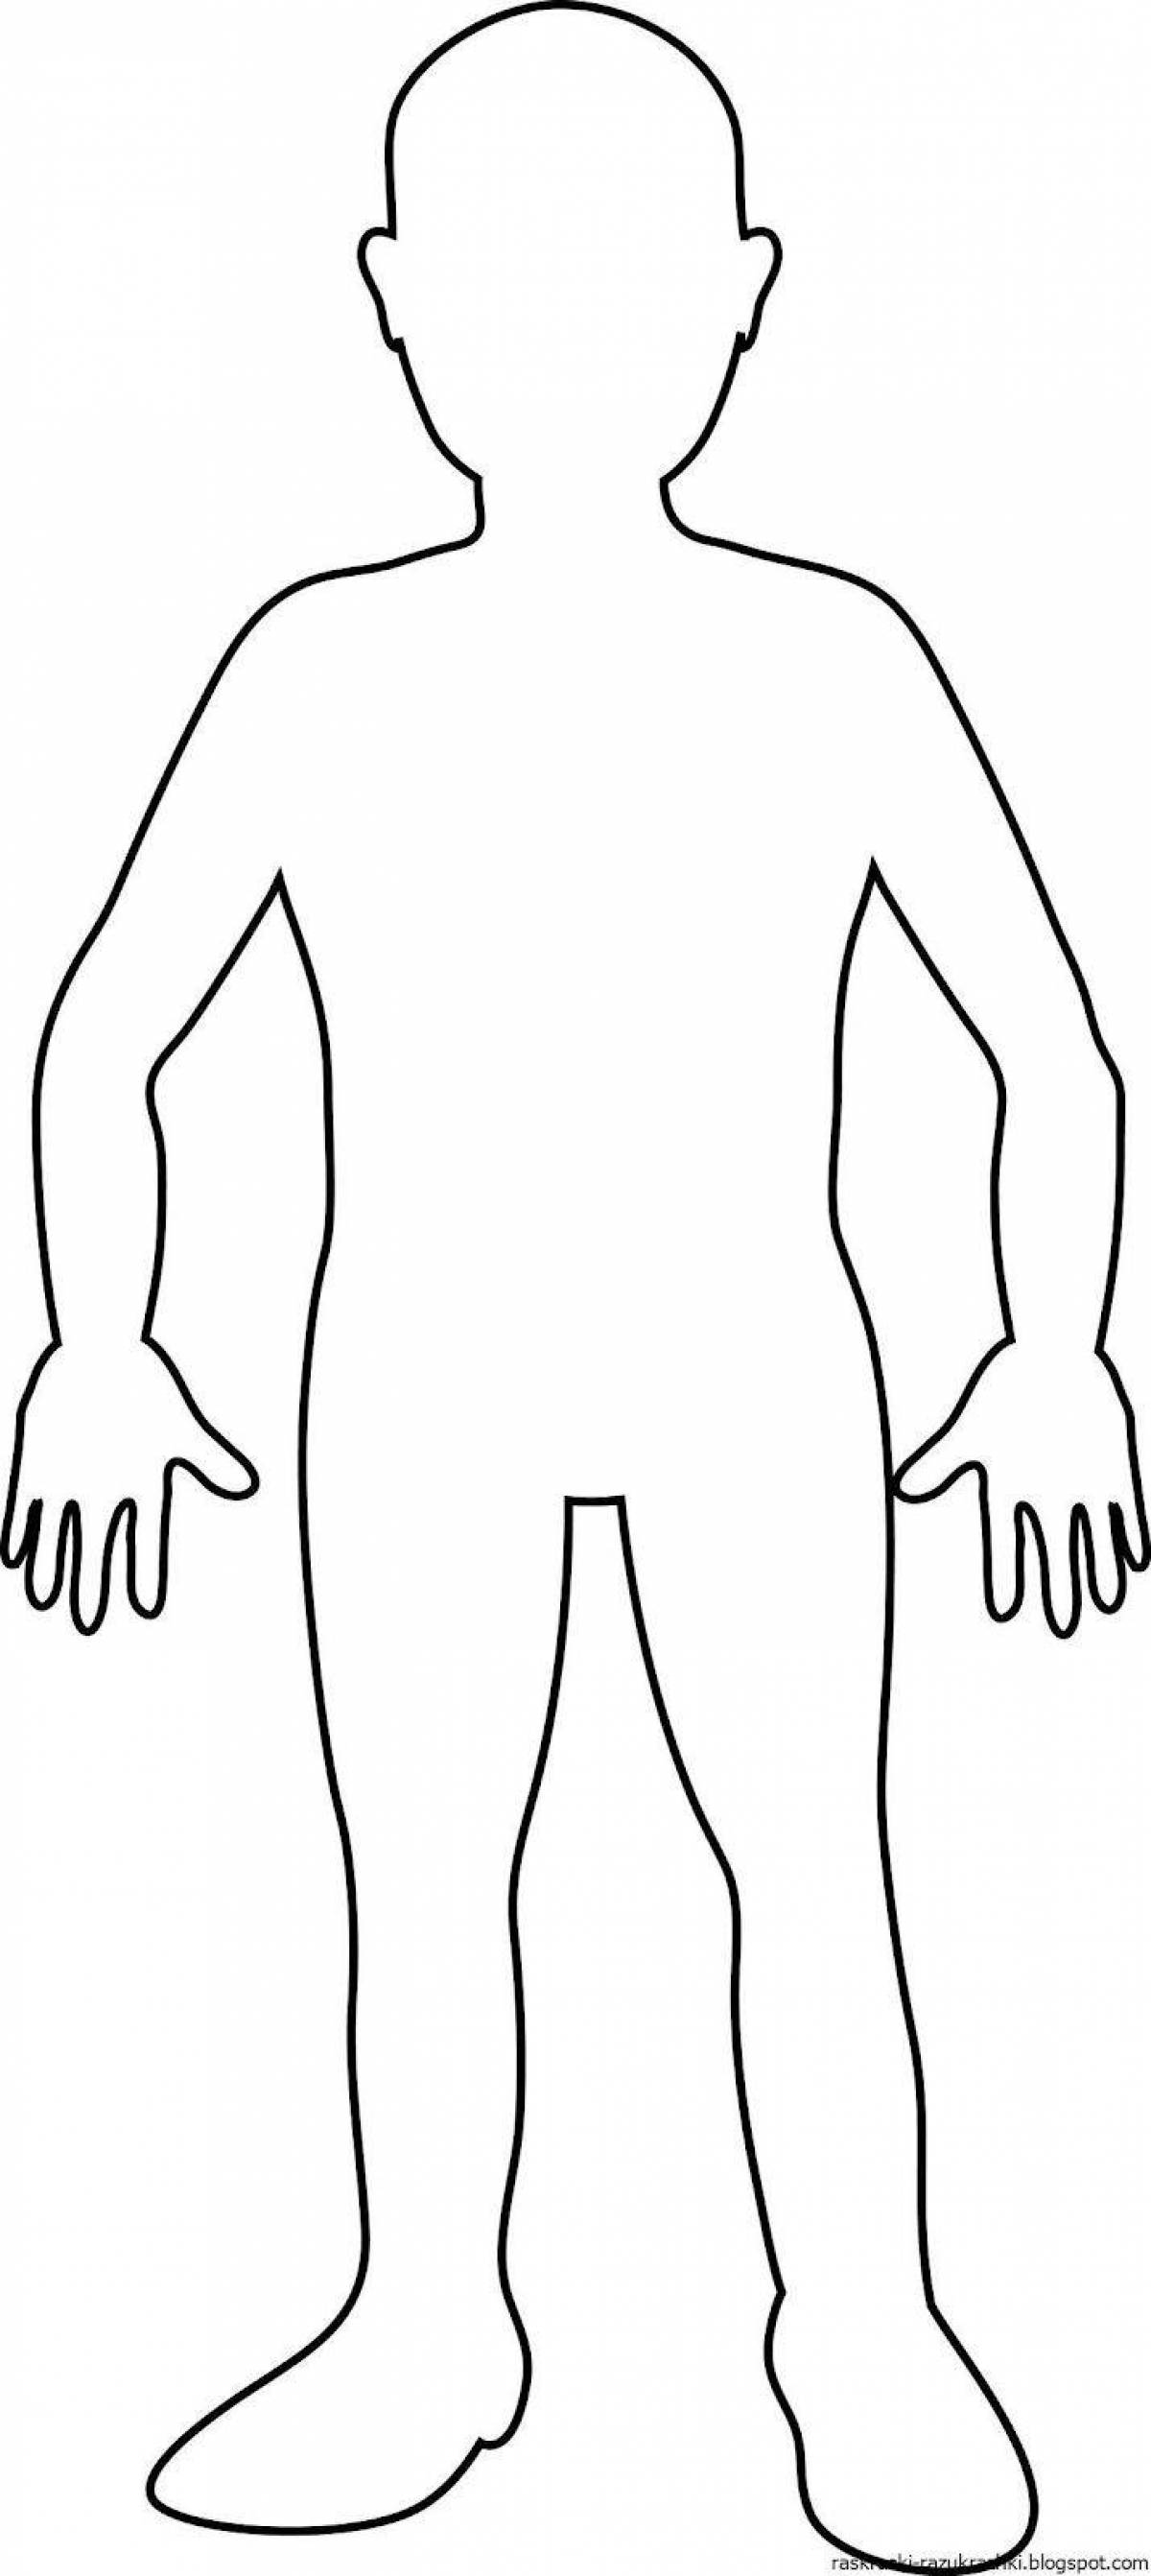 Animated body coloring page